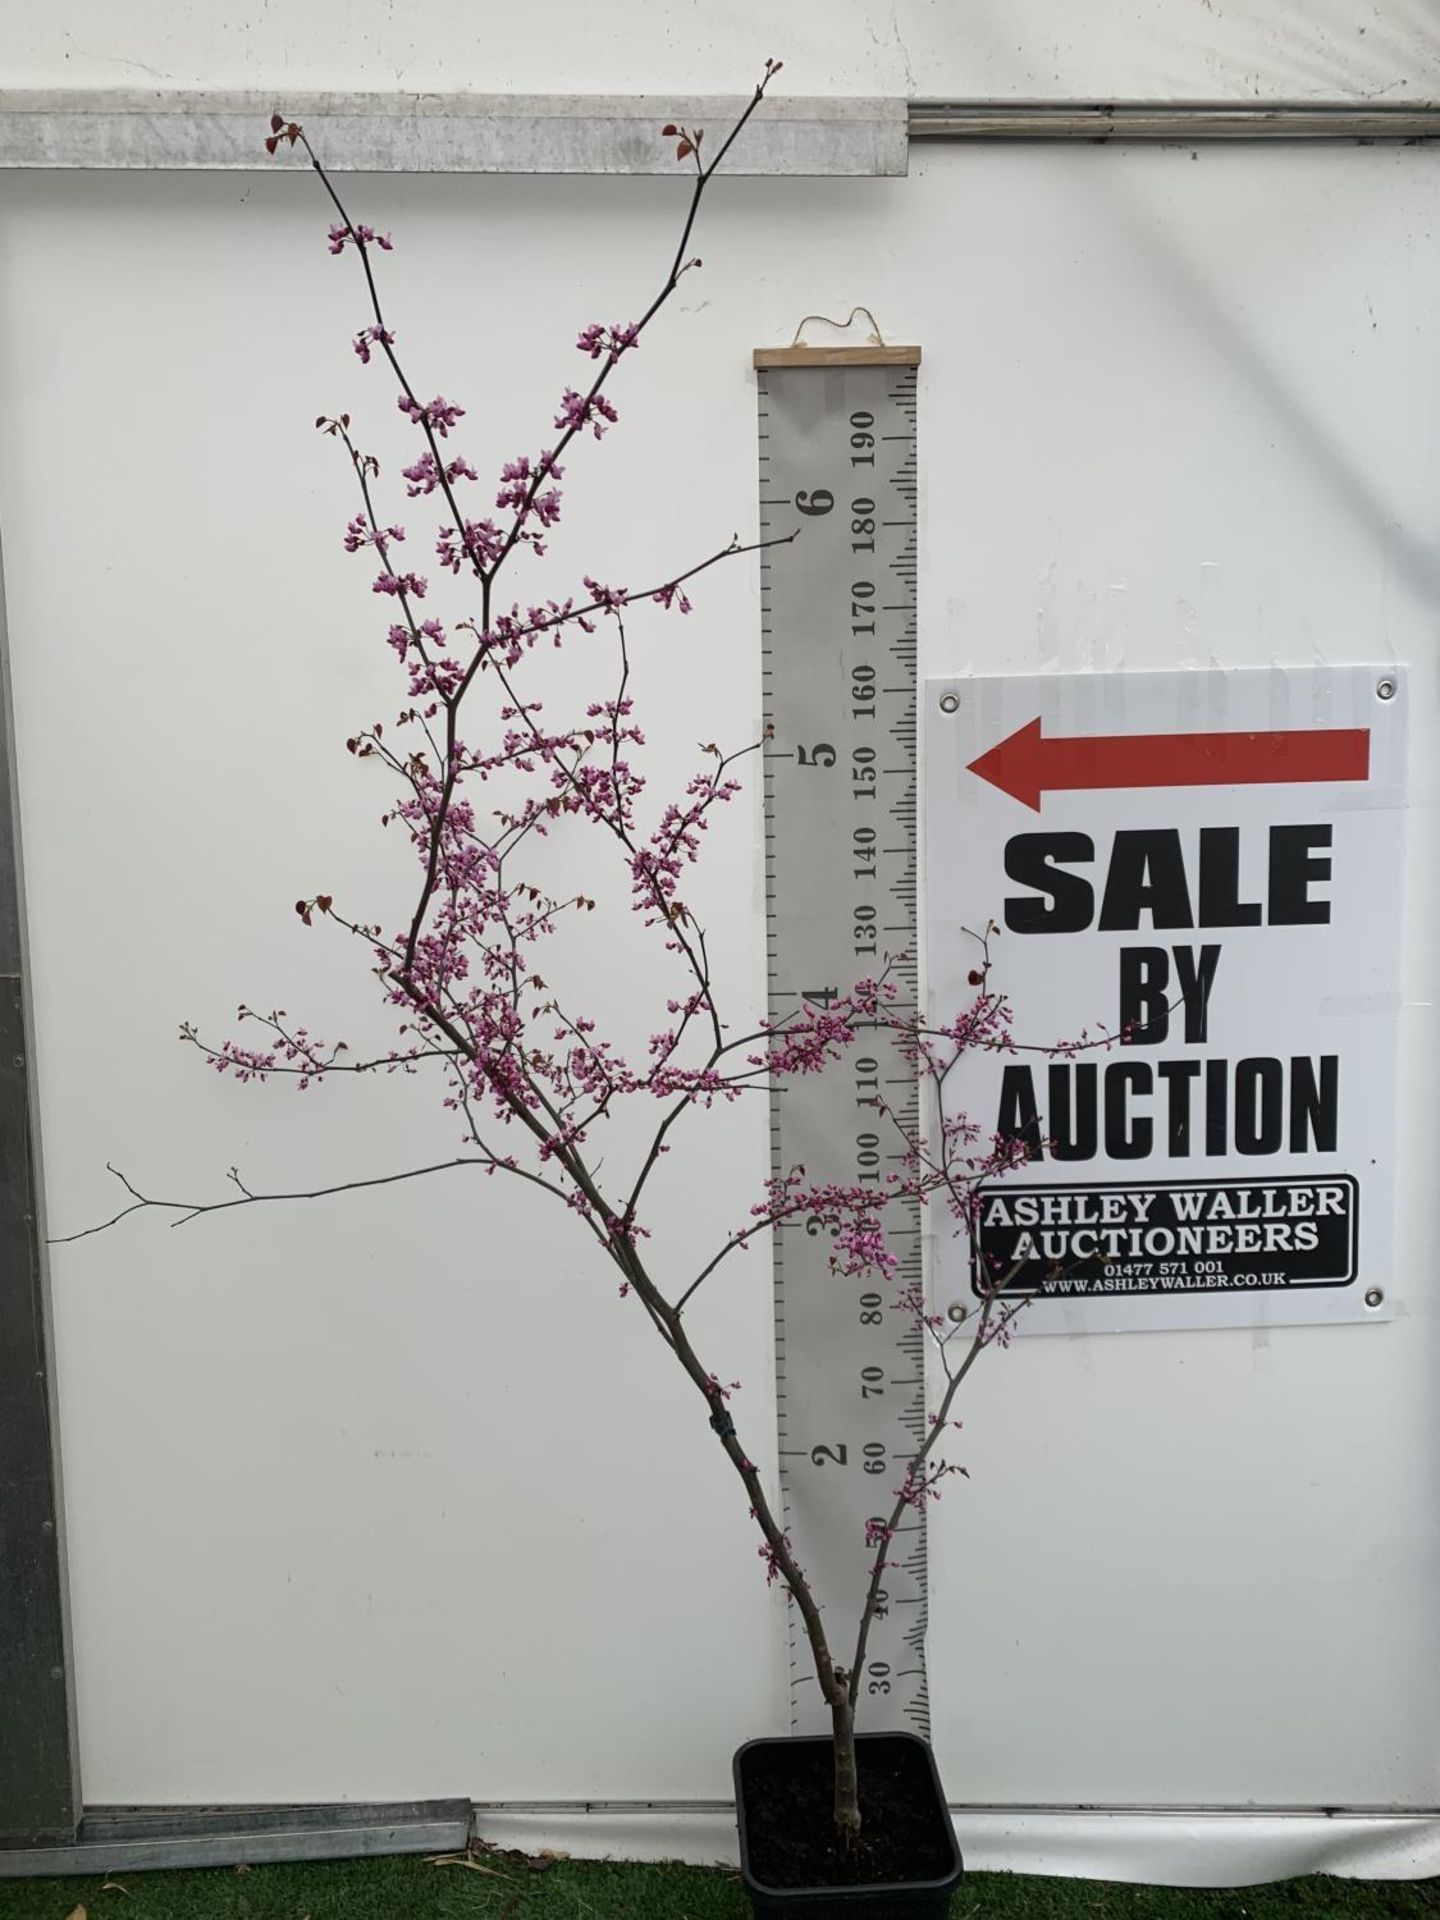 A CERCIS CANADENSIS CANADIAN REDBUD TREE IN PINK FLOWER OVER 2 METRES IN HEIGHT PLUS VAT IN A 7